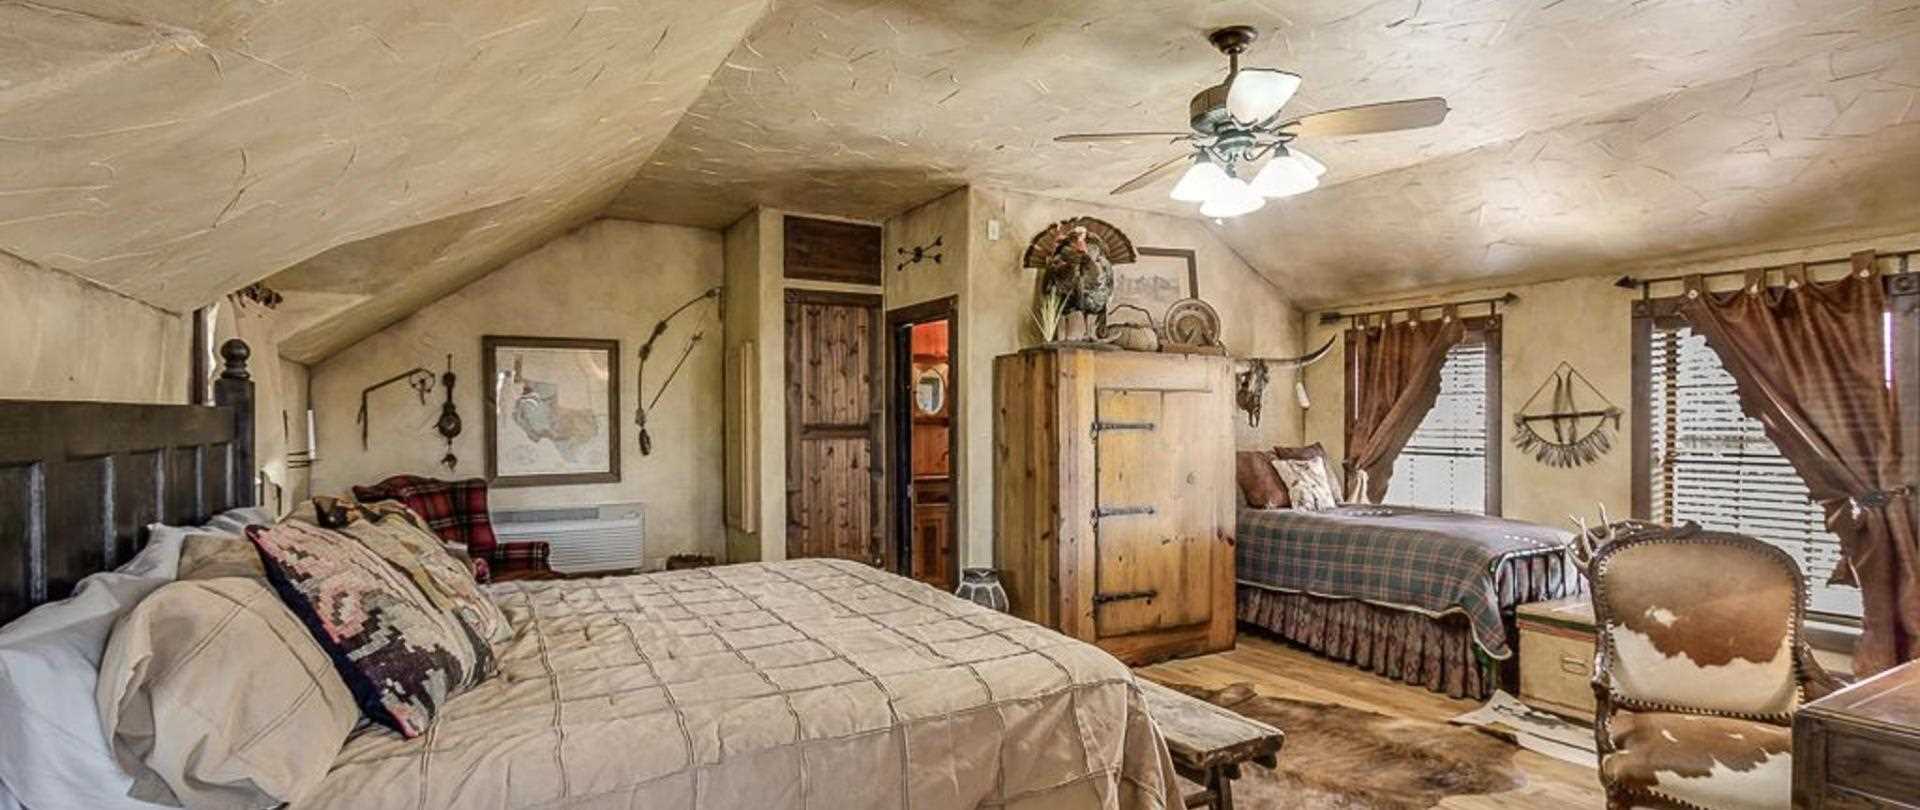                                                 The rustic style of the master suite is something you'll never find in a motel room!